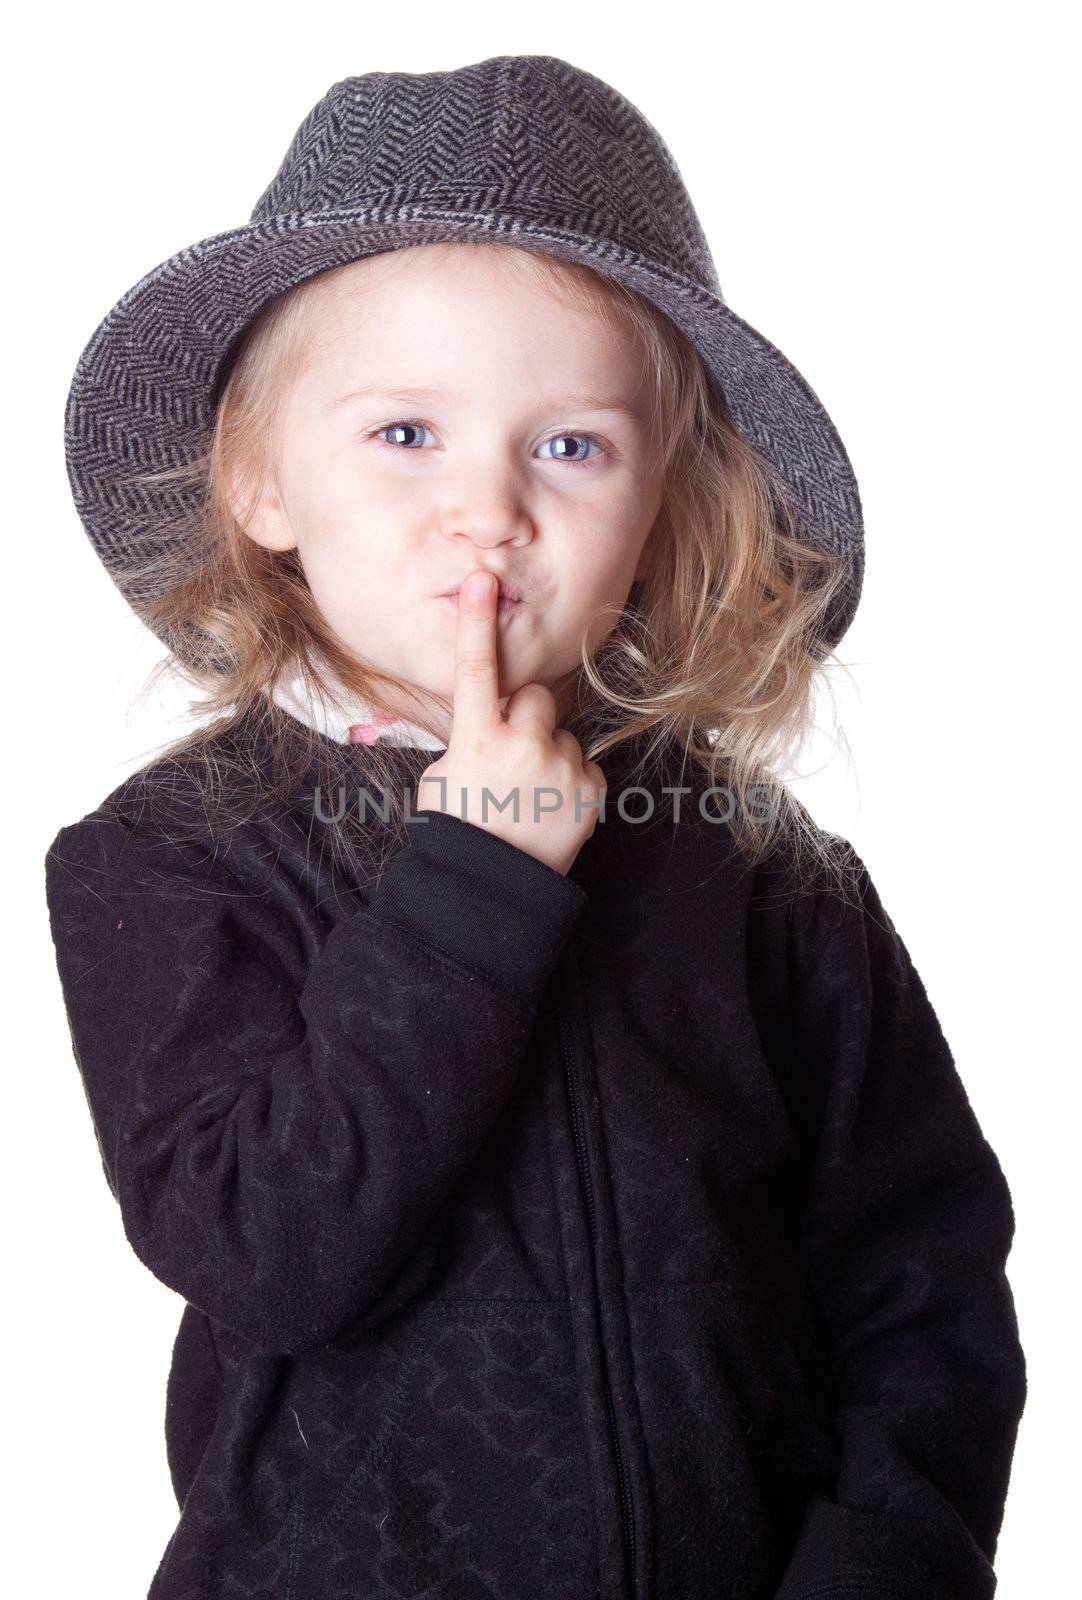 An isolationg of a cute girl on white.  She has her finger over her lips and is asking a question.